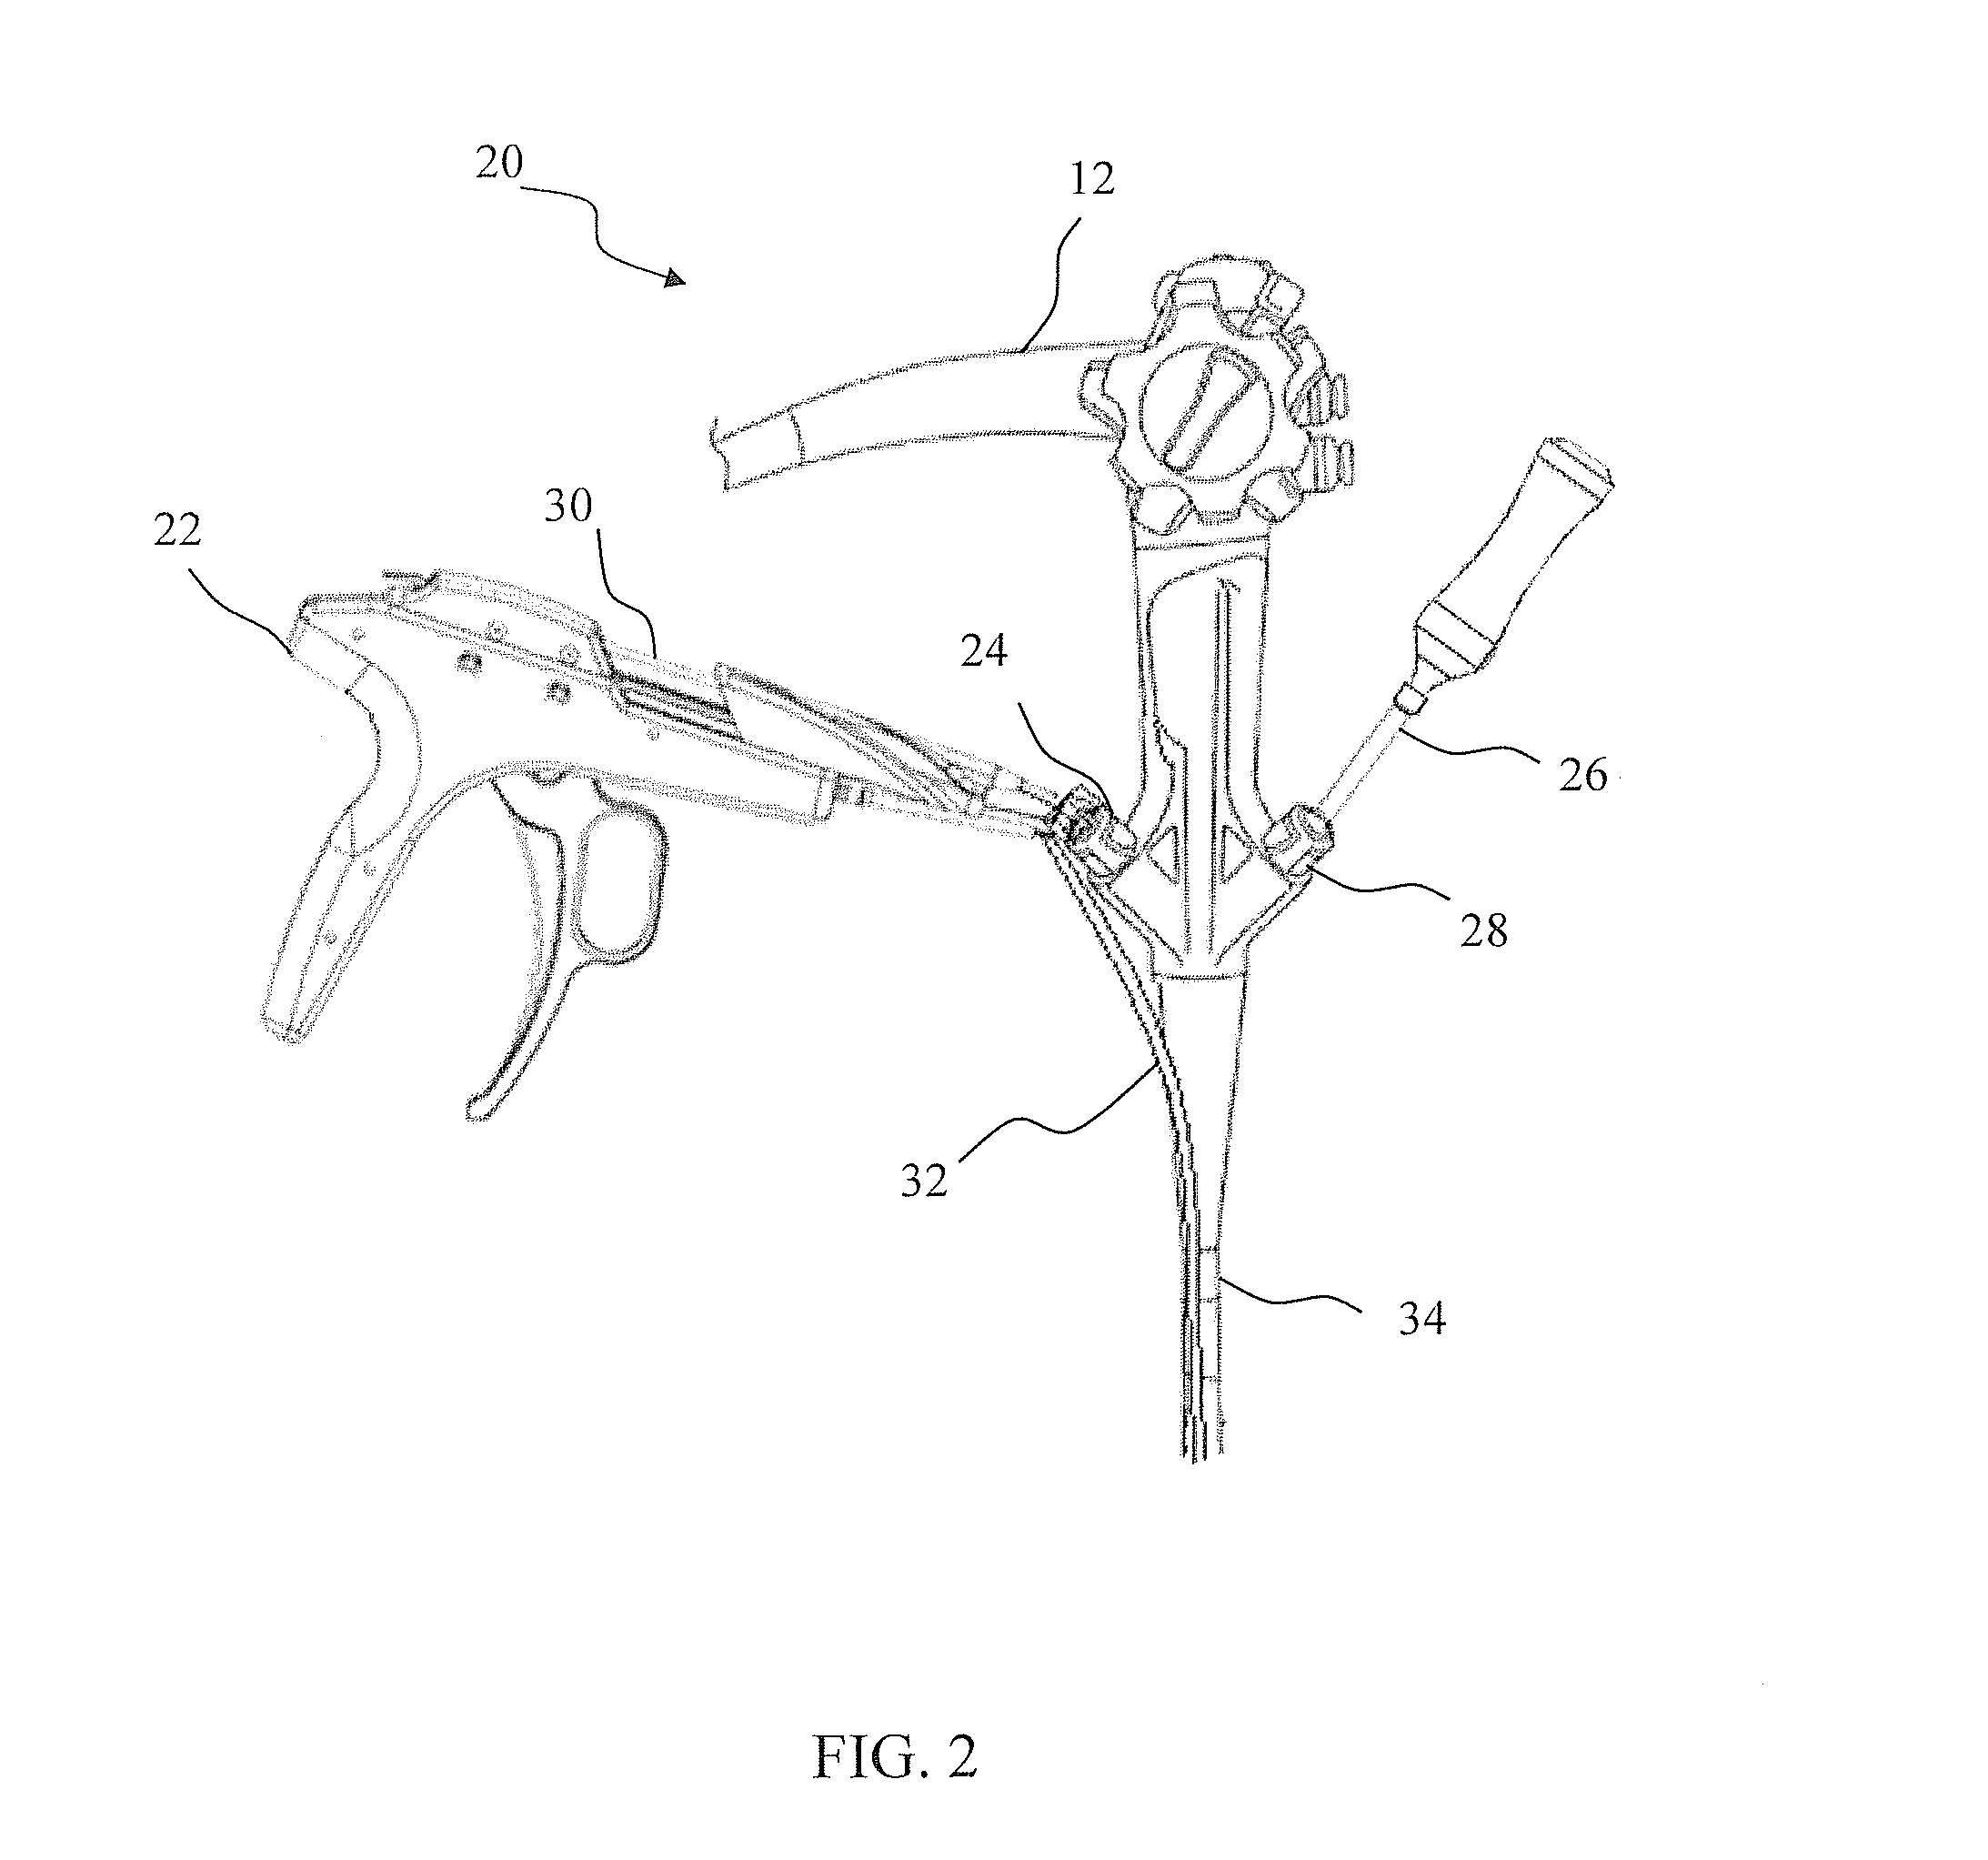 Endoscopic Helix Tissue Grasping Device